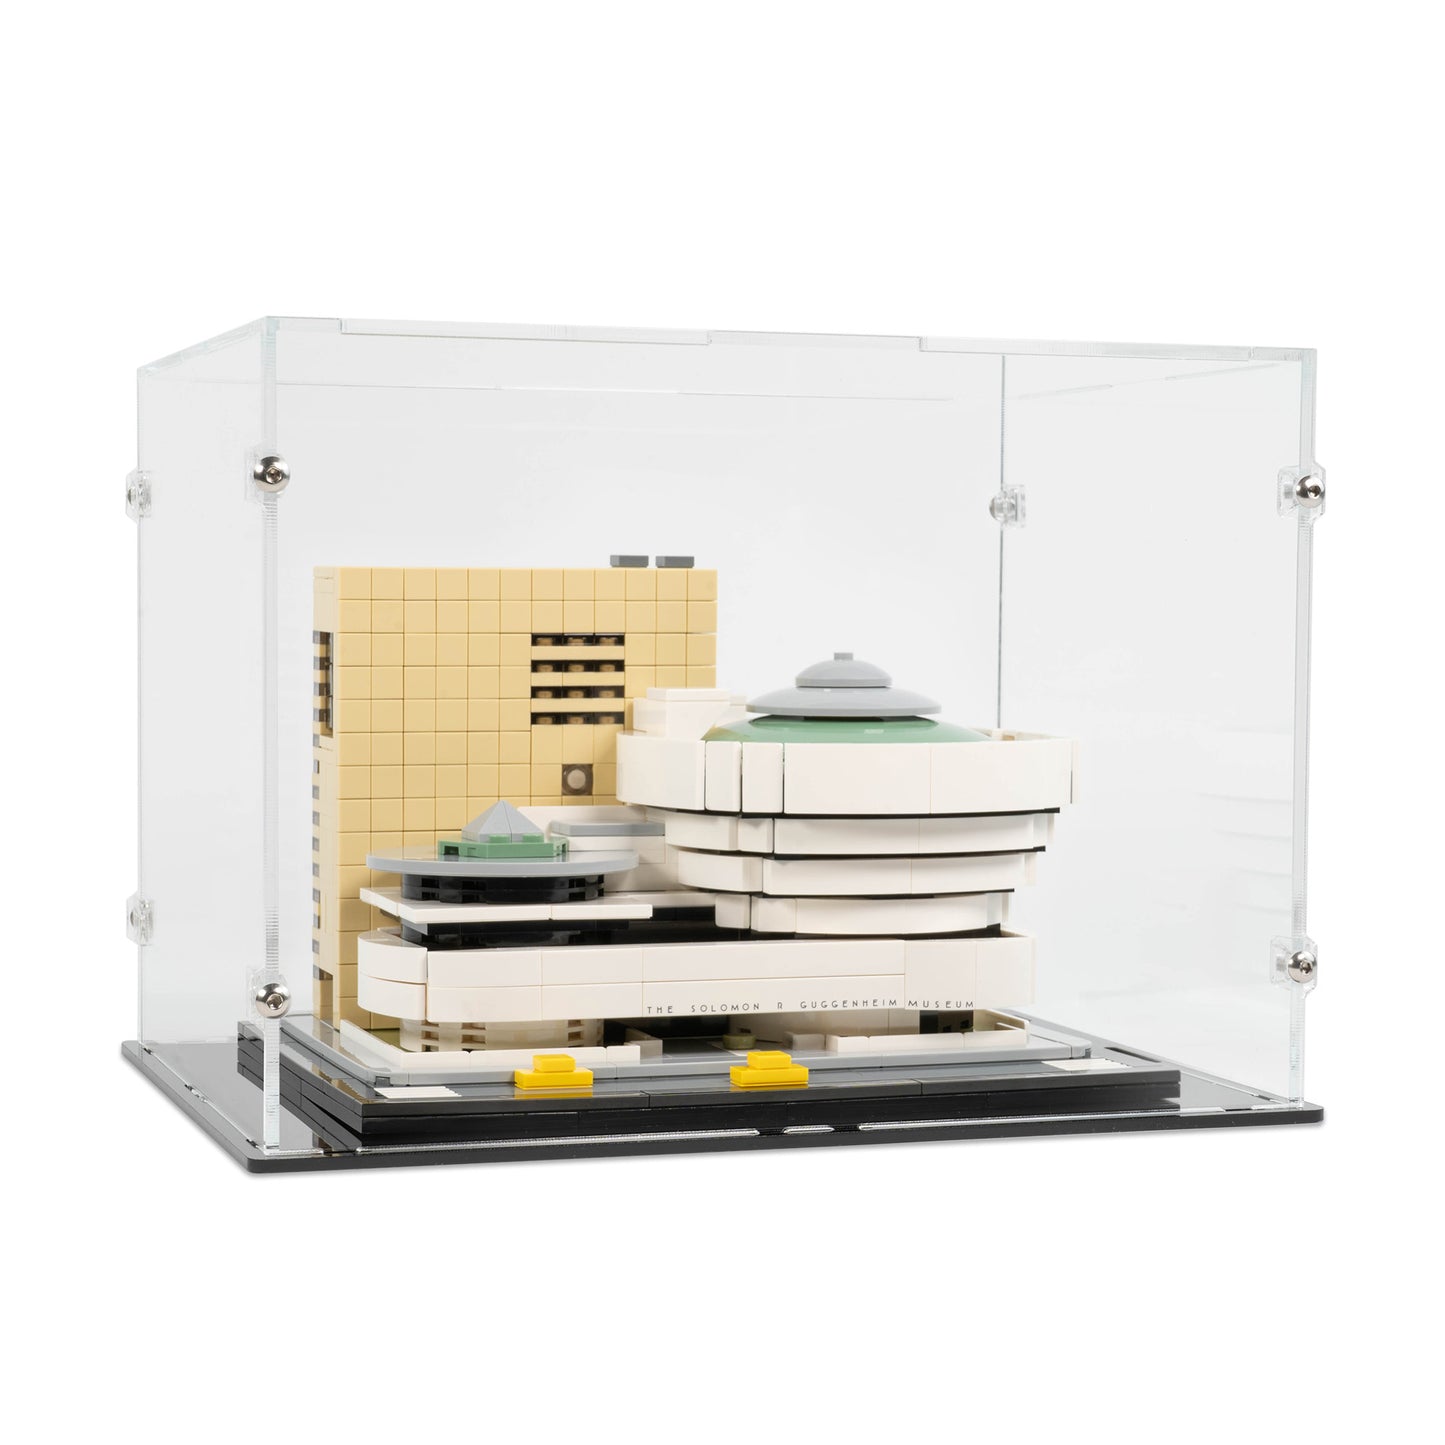 Angled view of LEGO 21035 Solomon R Guggenheim Museum Display Case.